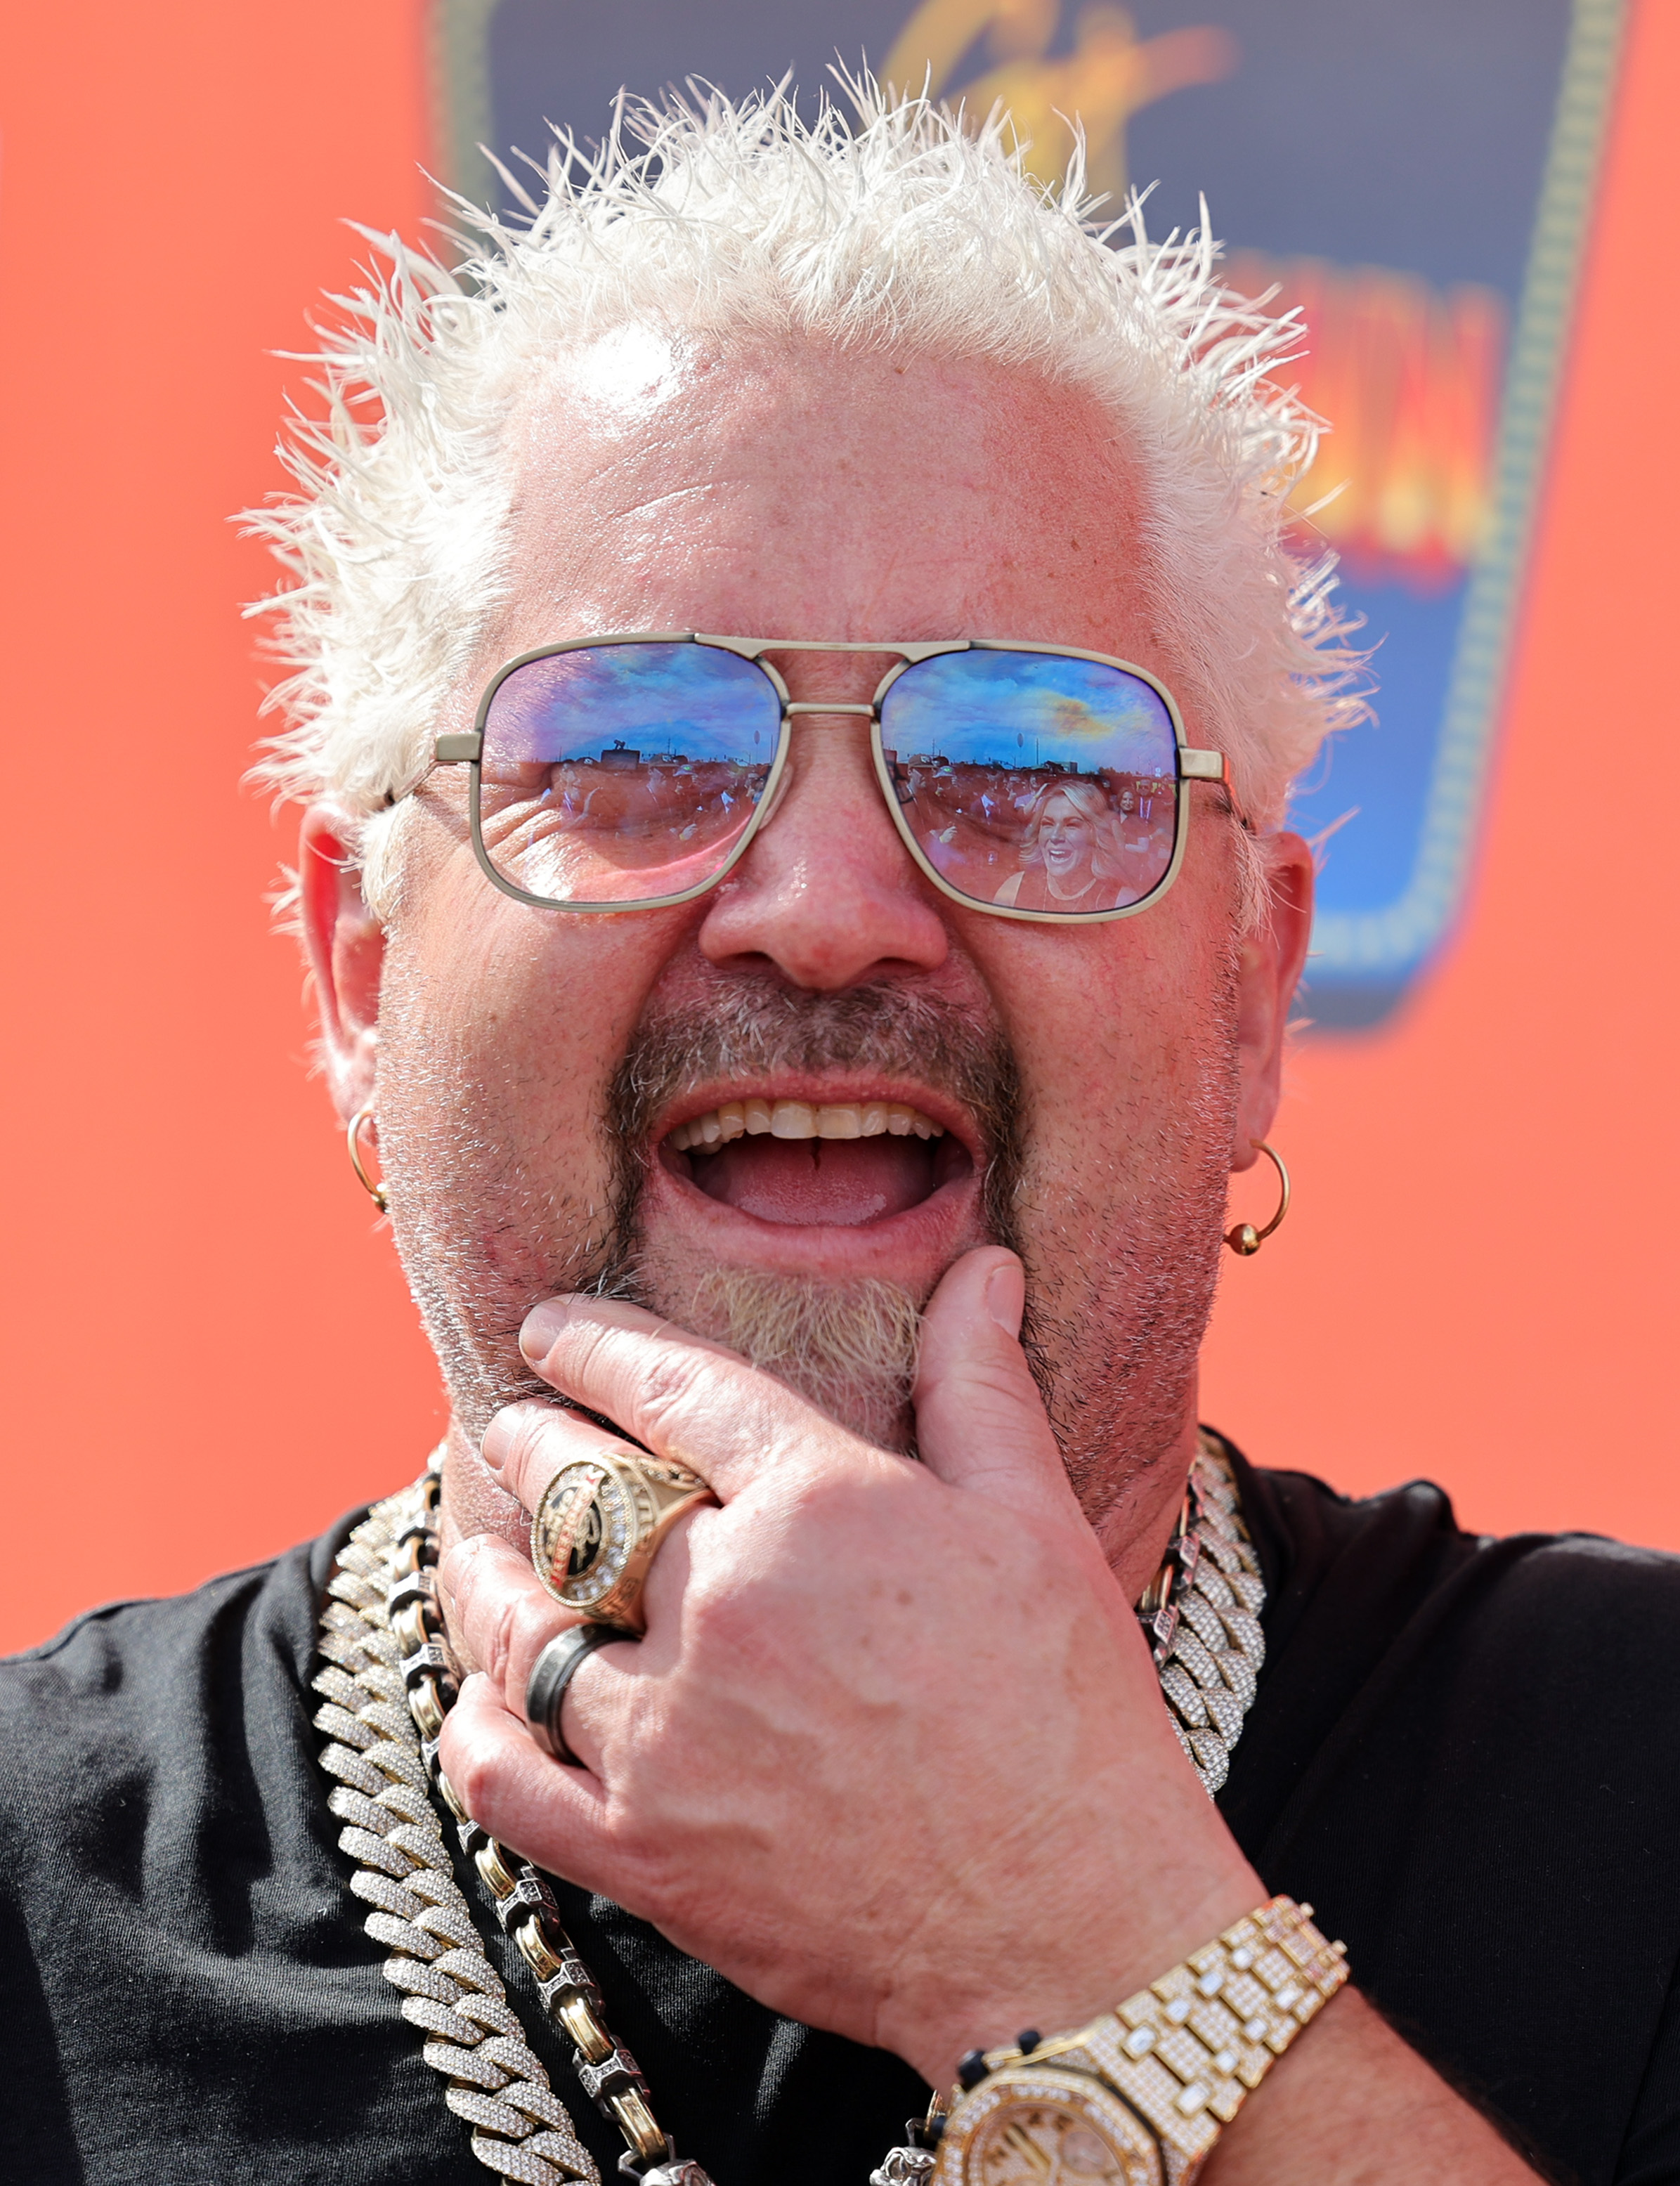 Guy Fieri at Guy Fieri's Flavortown Tailgate in Arizona in February 2023 | Source: Getty Images